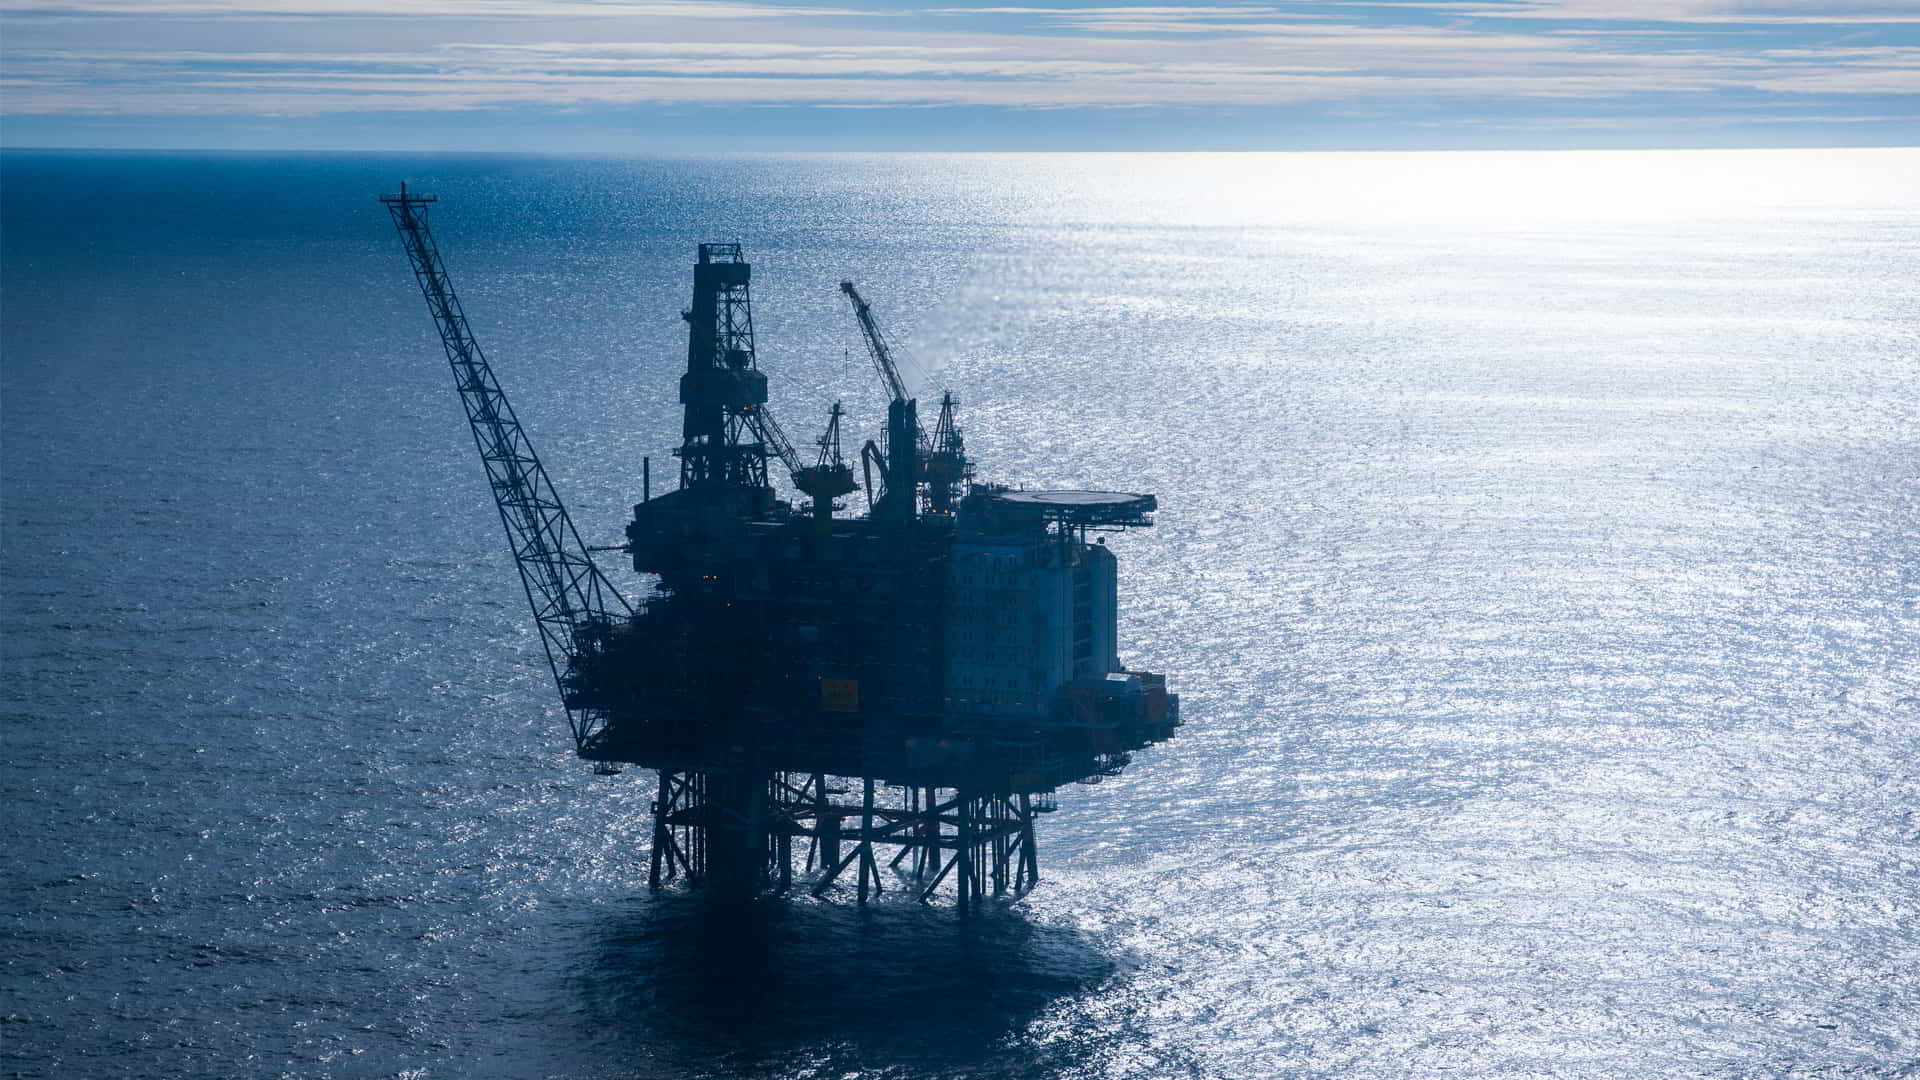 Lime gets go-ahead for North Sea field acquisition as Repsol heads out